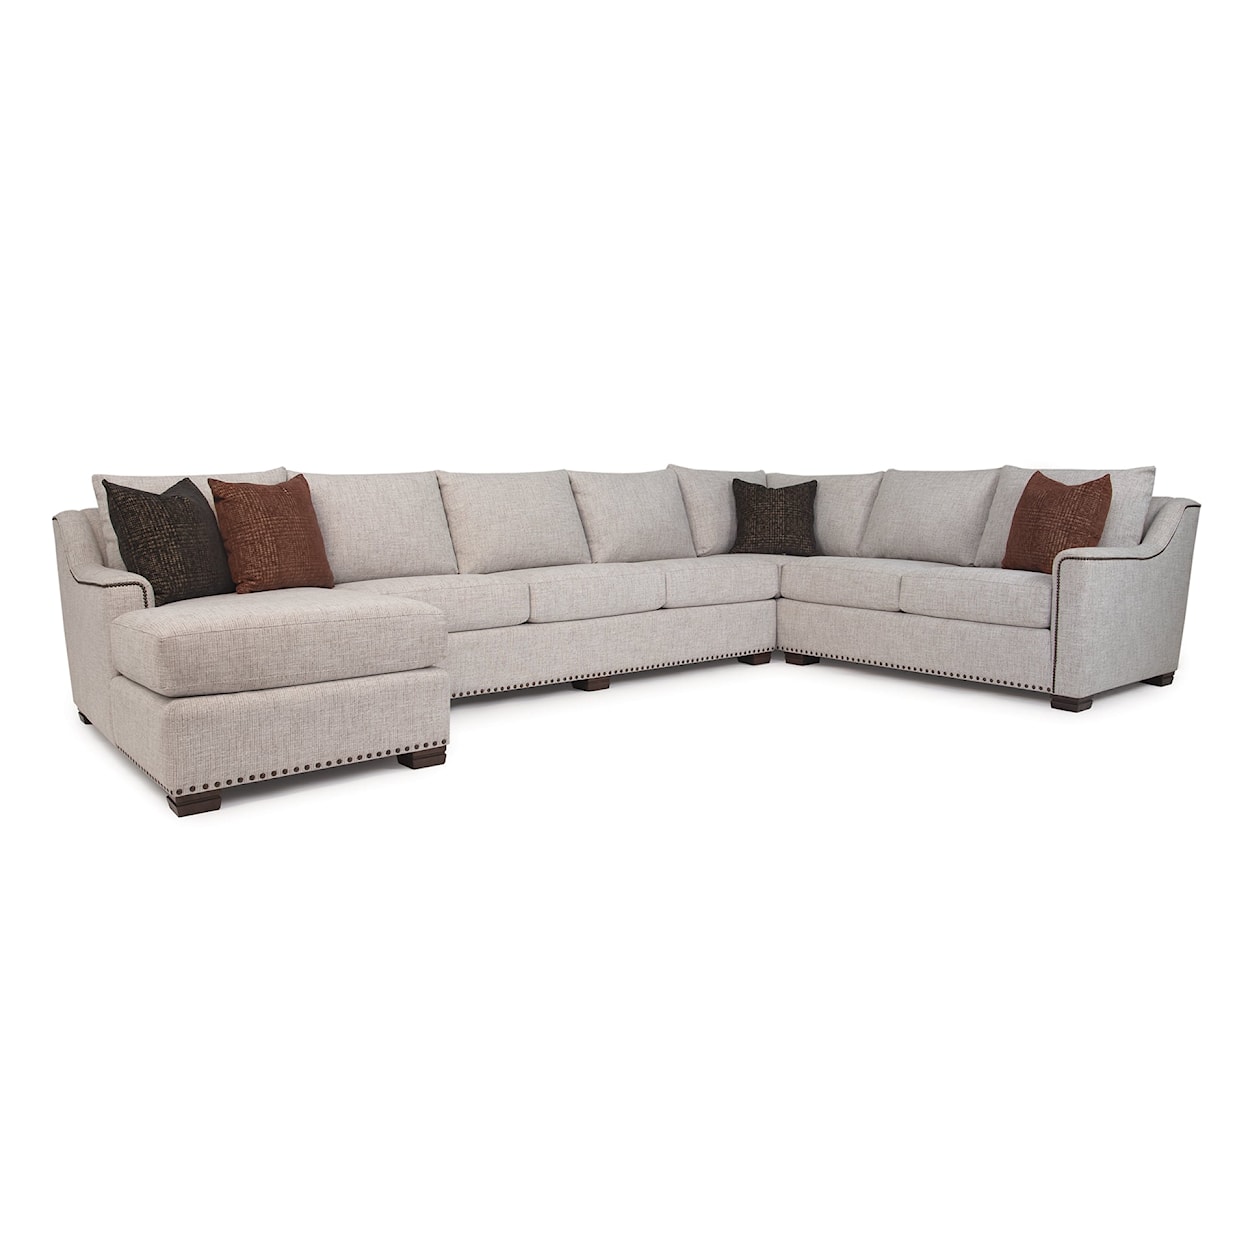 Smith Brothers Build Your Own 9000 Series Sectional Sofas